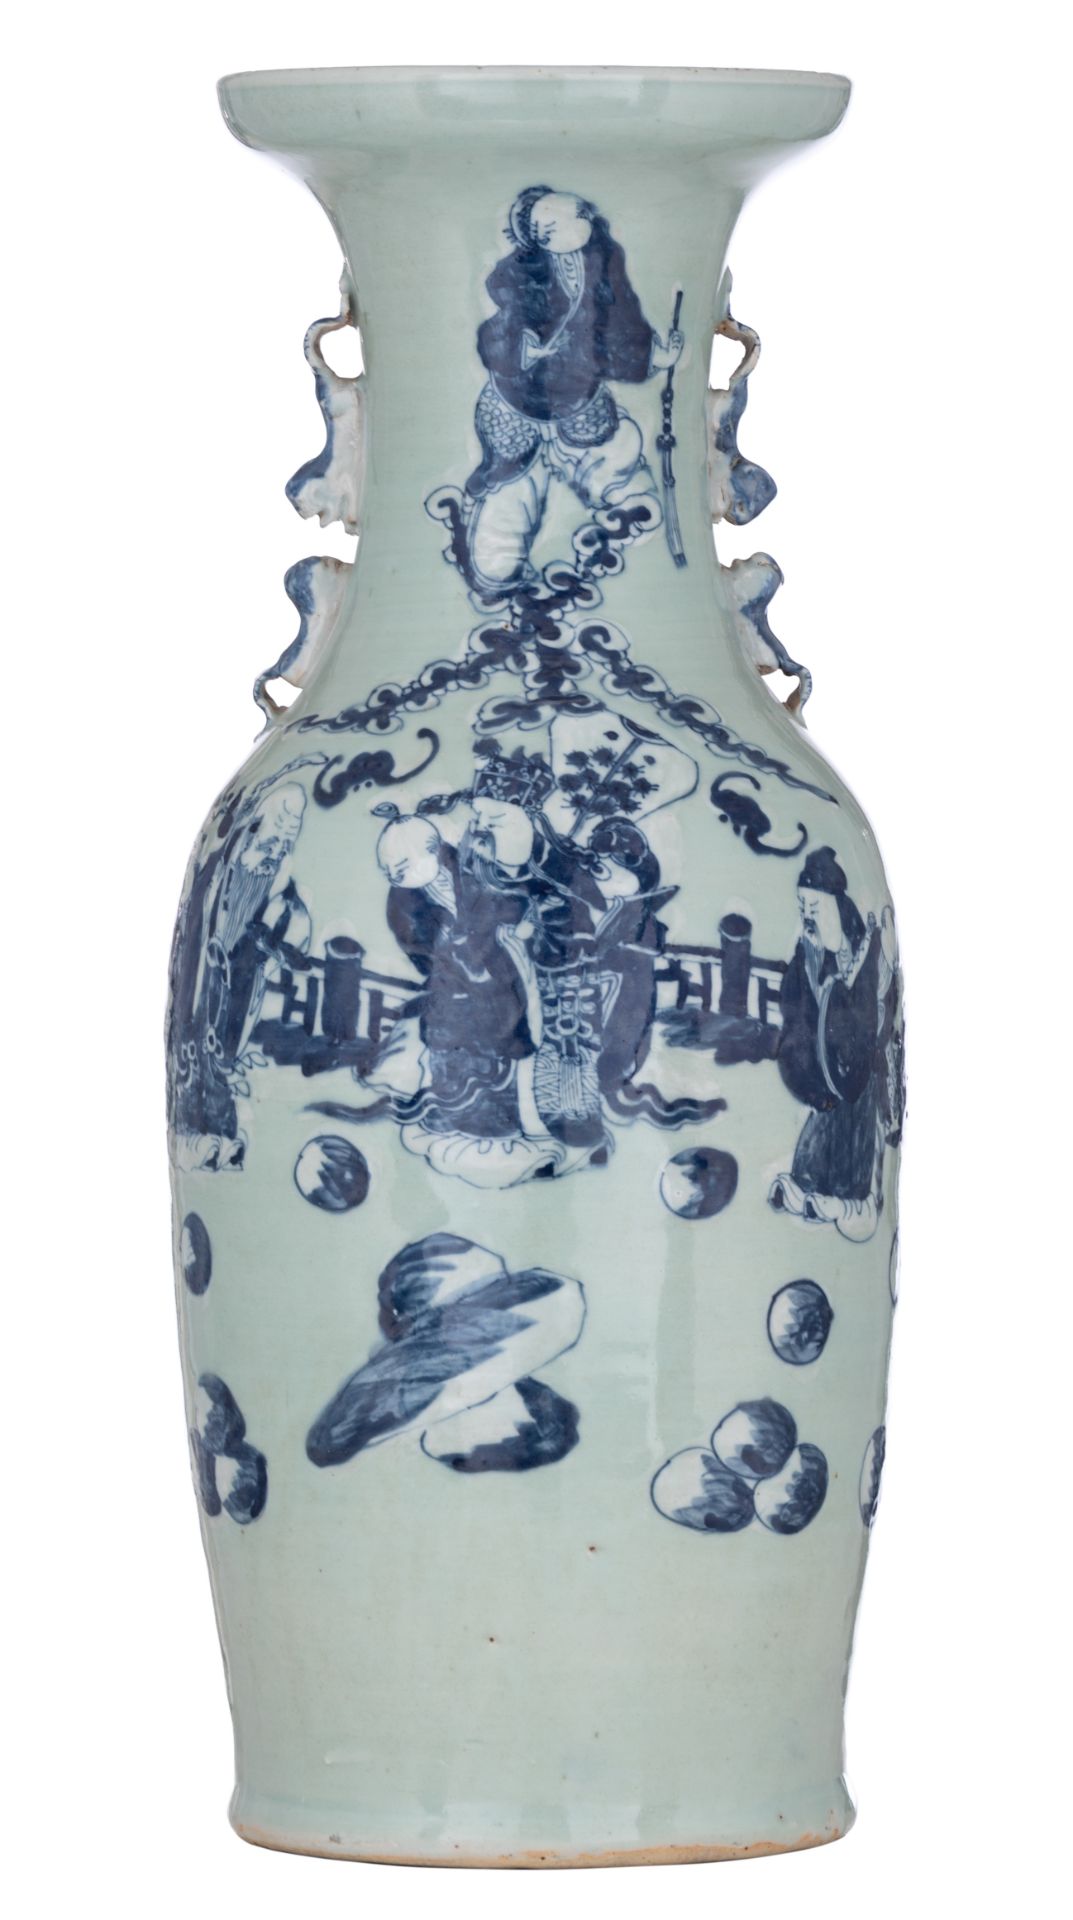 A Chinese blue and white on a celadon ground vase, 19thC, H 58,5 cm